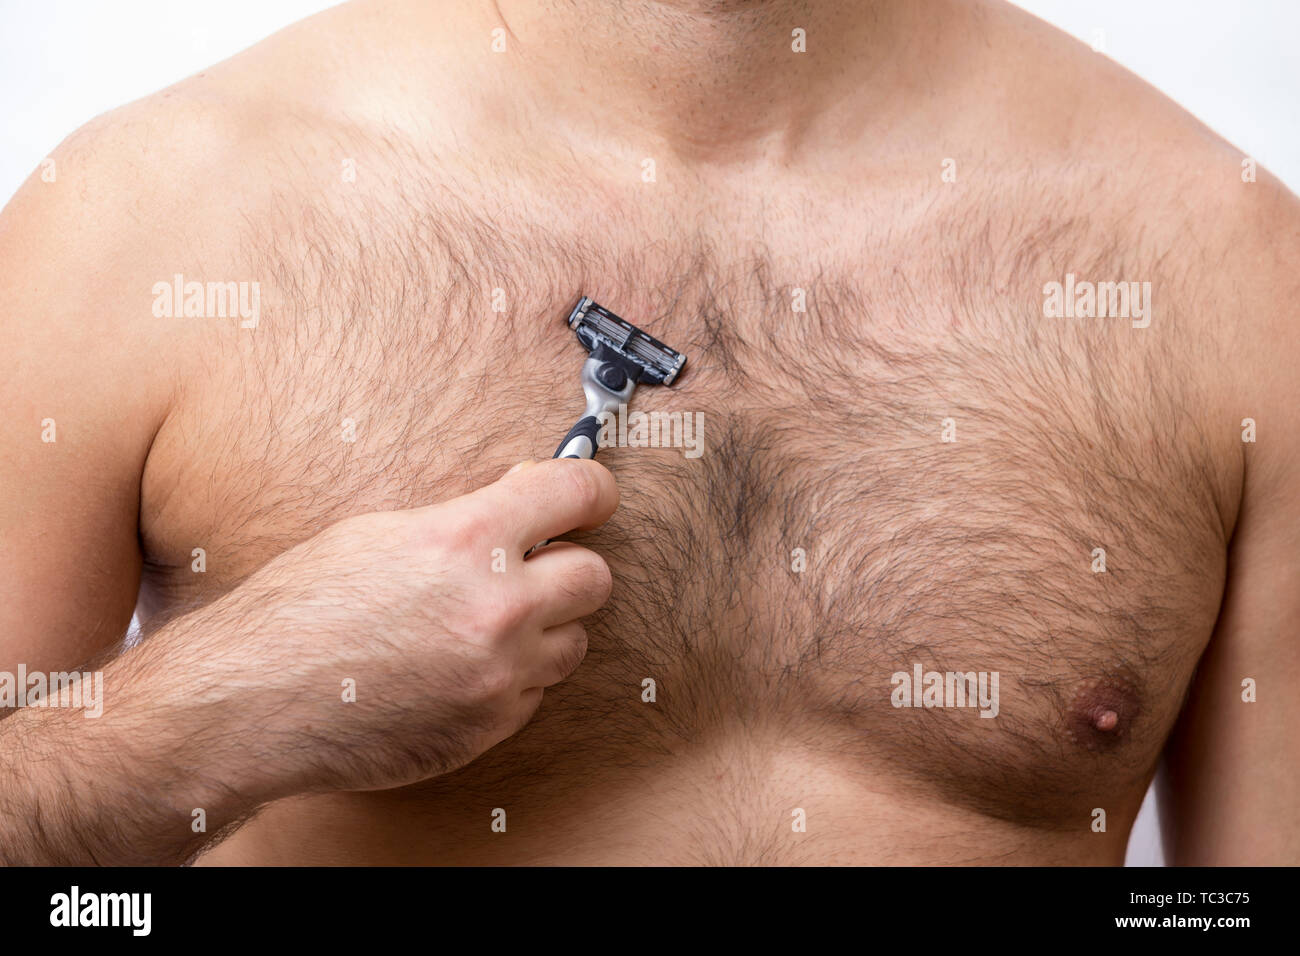 5 Facts Men Need to Know About Laser Chest Hair Removal